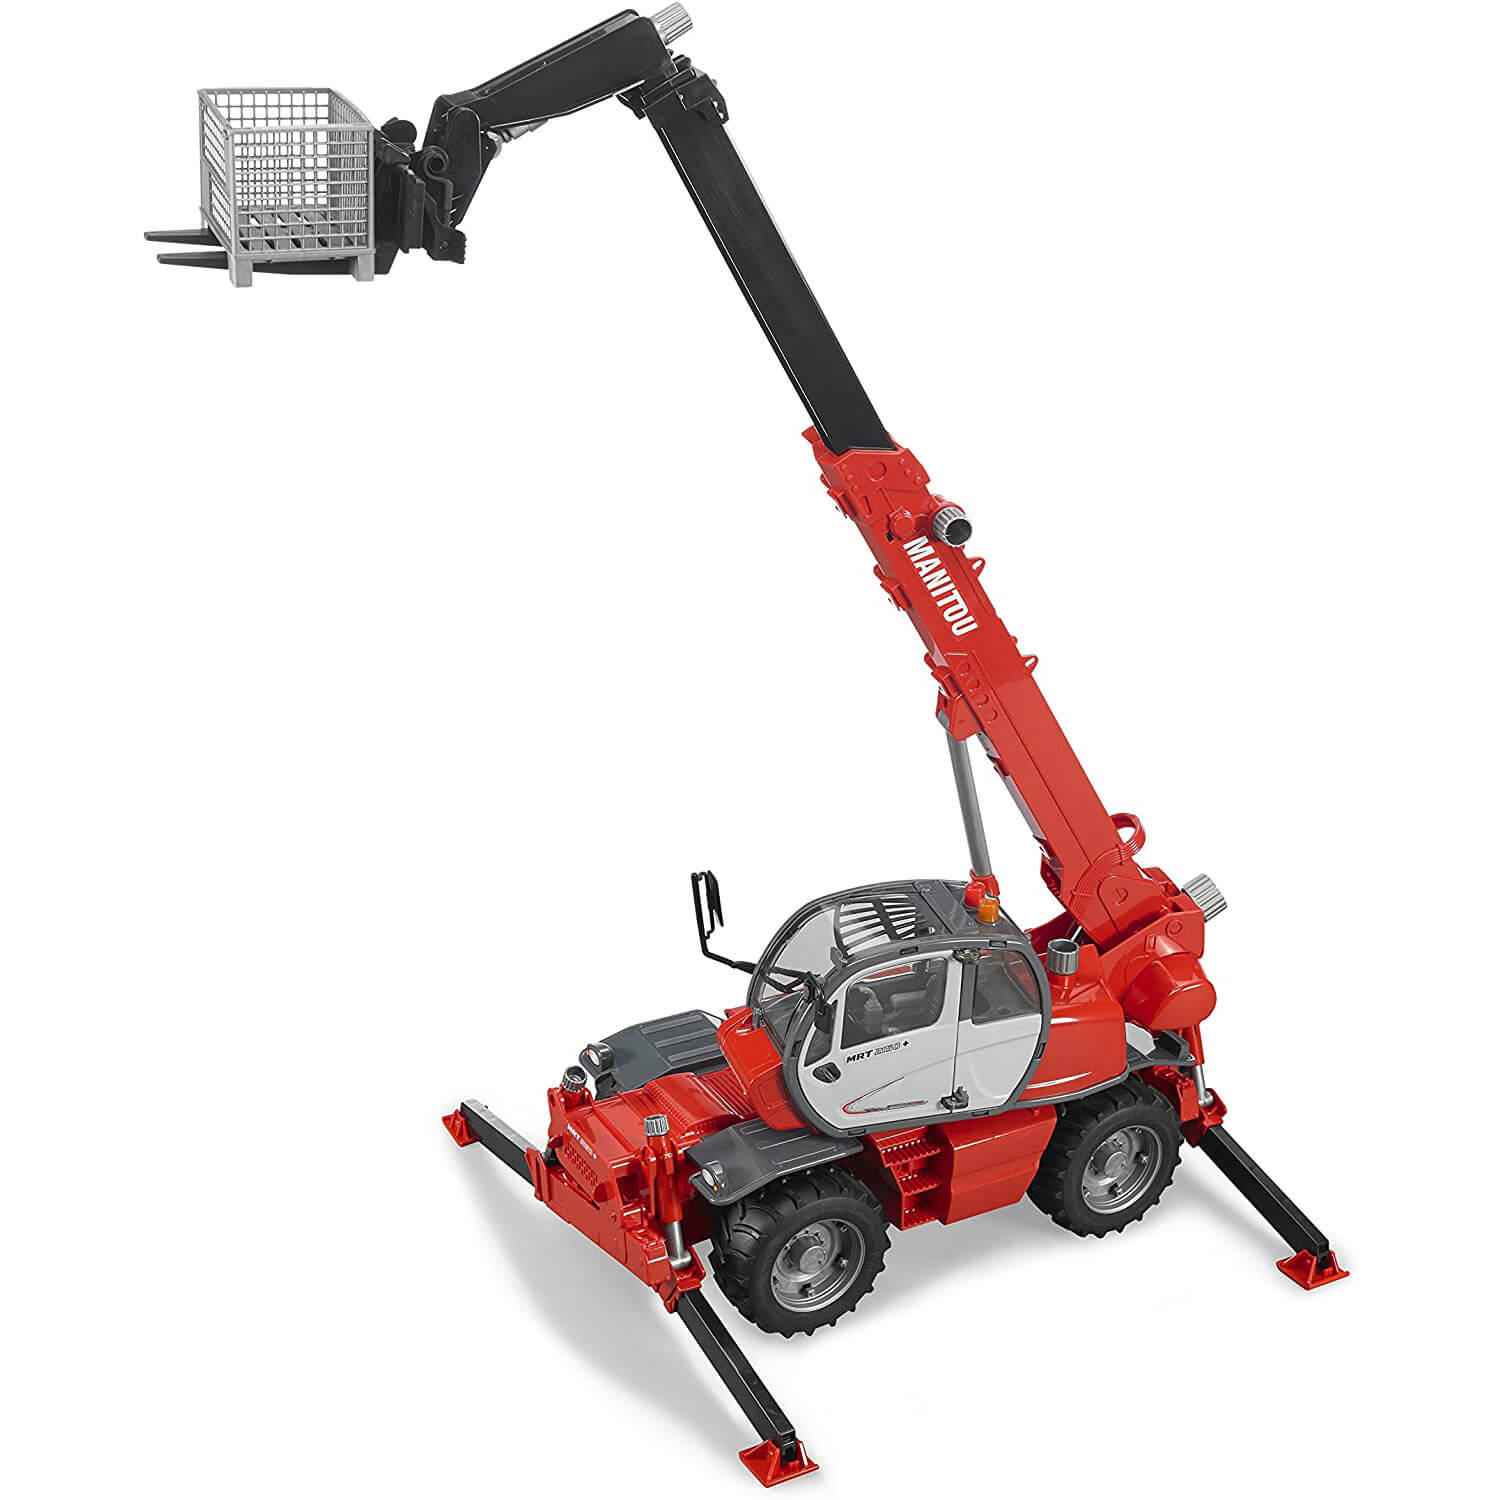 Bruder Pro Series Manitou Telescopic Loader MRT 2150 1:16 Scale Vehicle